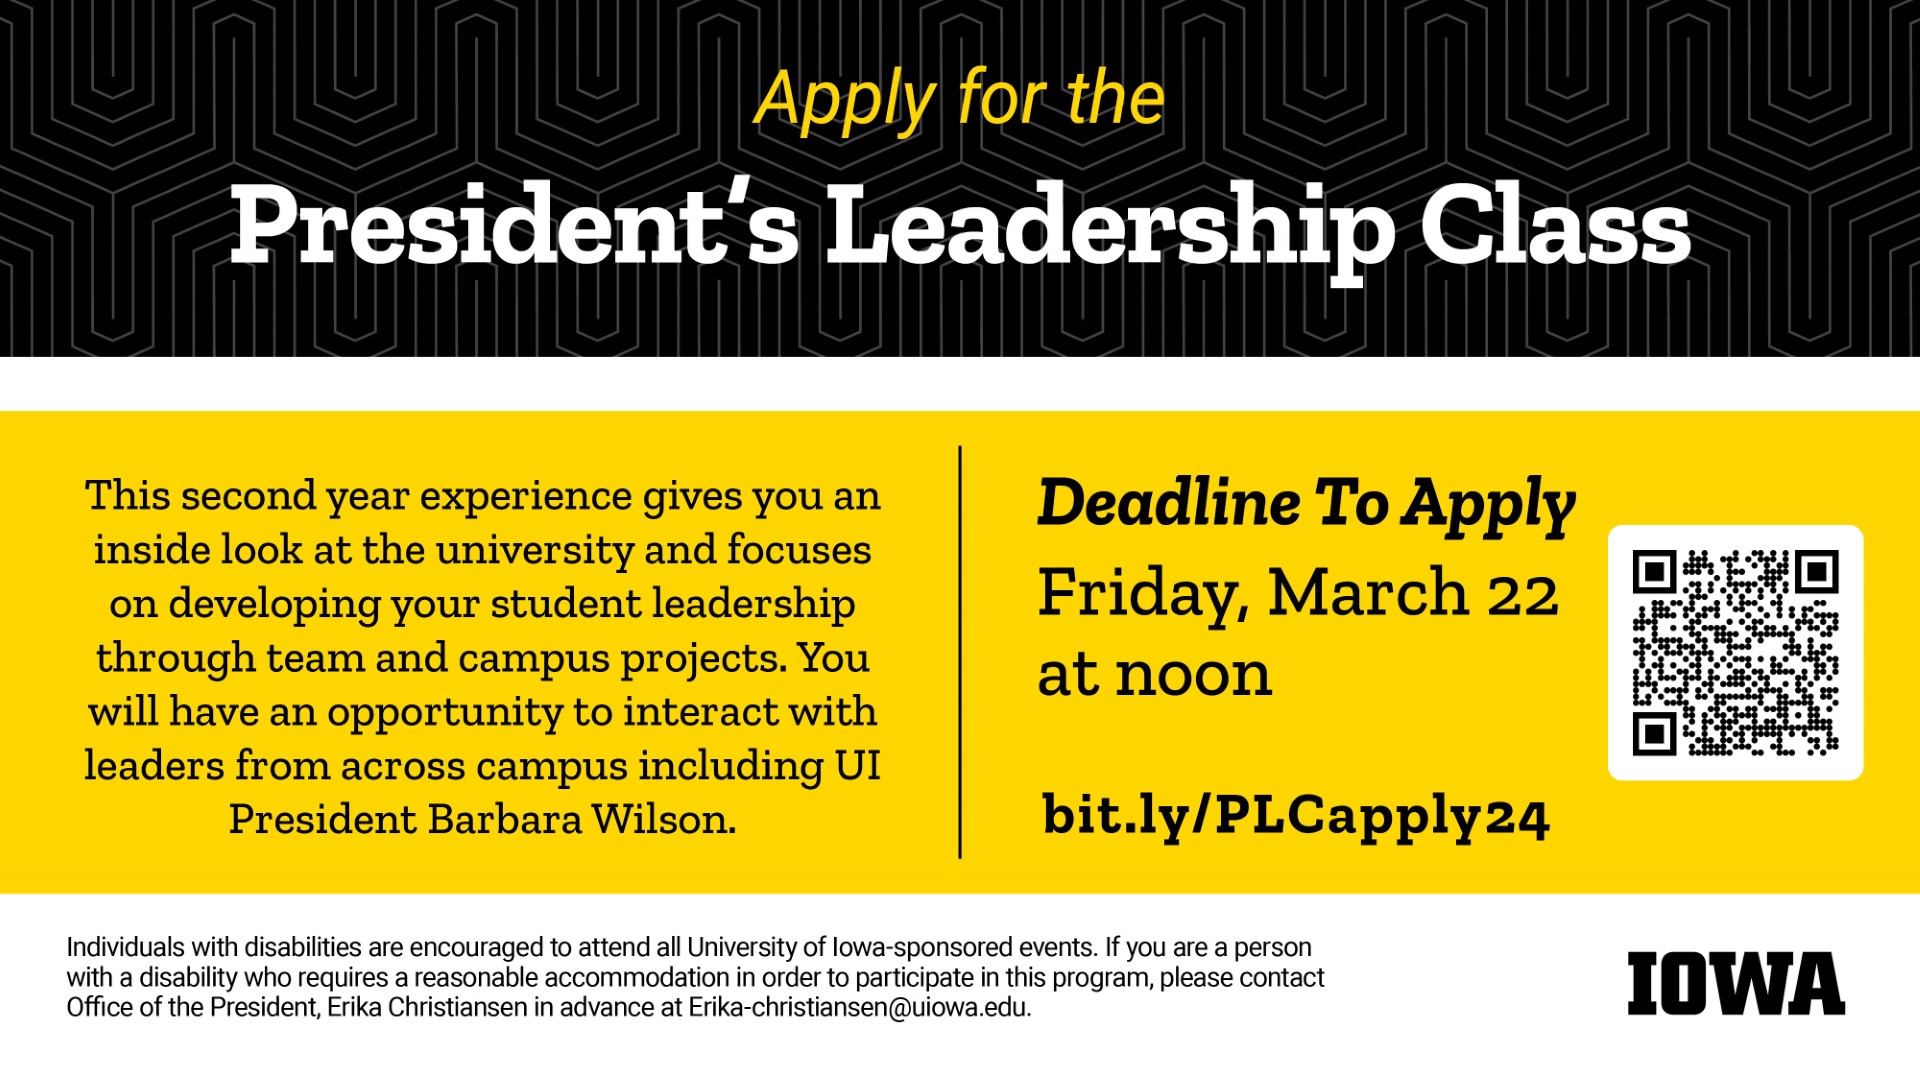 Apply for the President's Leadership Class